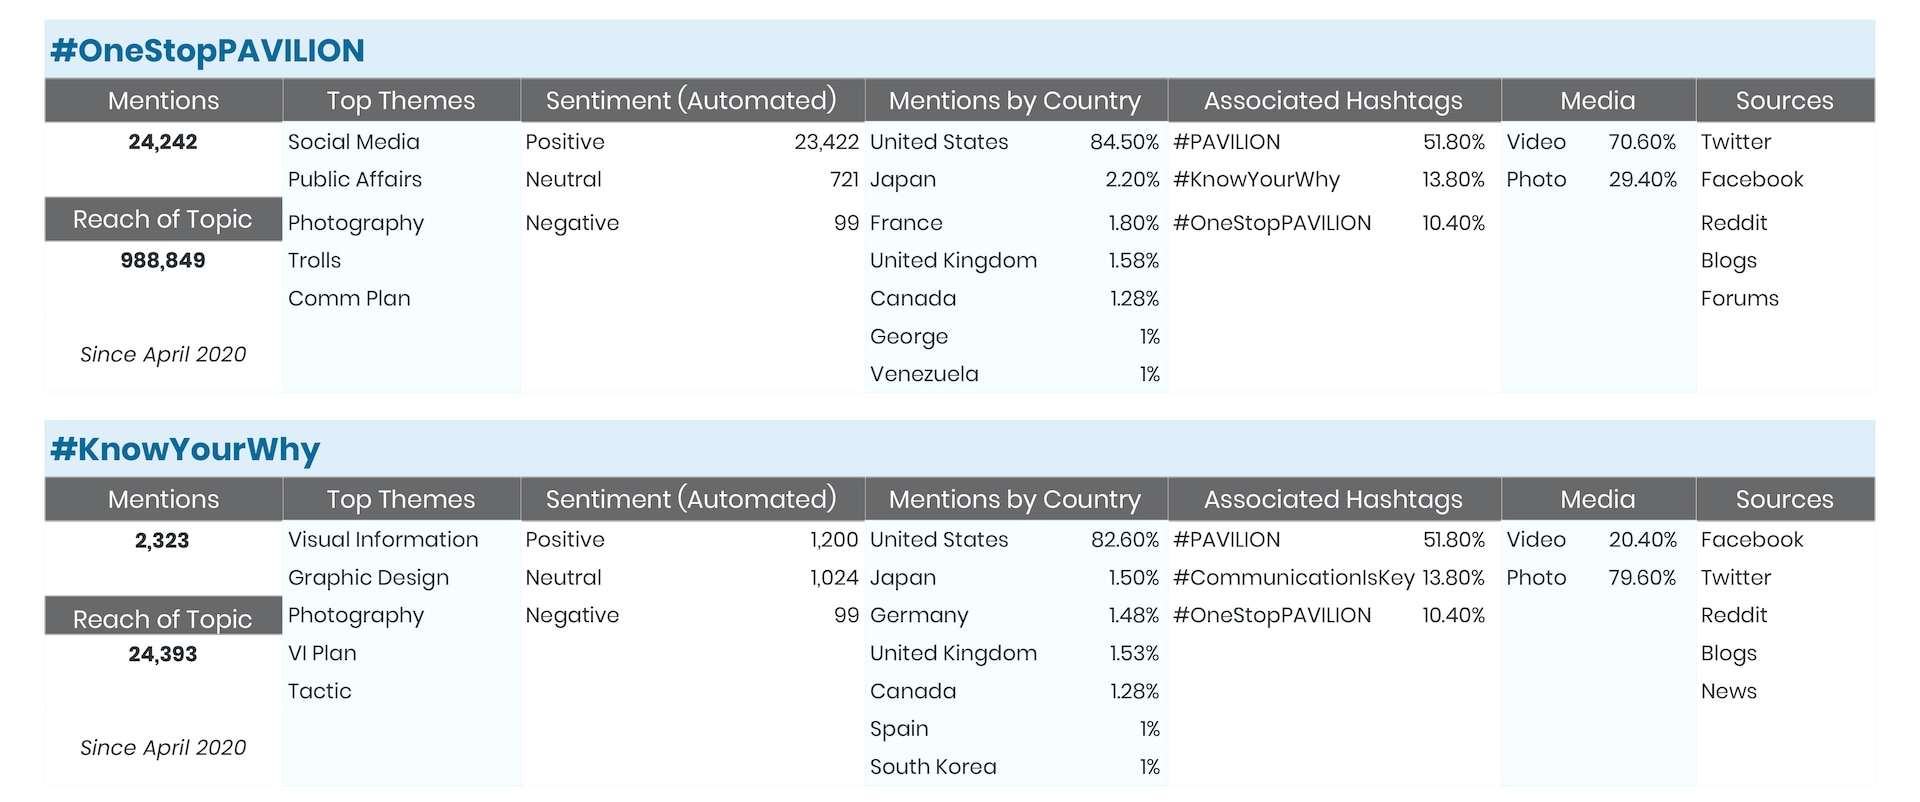 Example of social media related analytics collected for two hashtag campaigns for PAVILION.